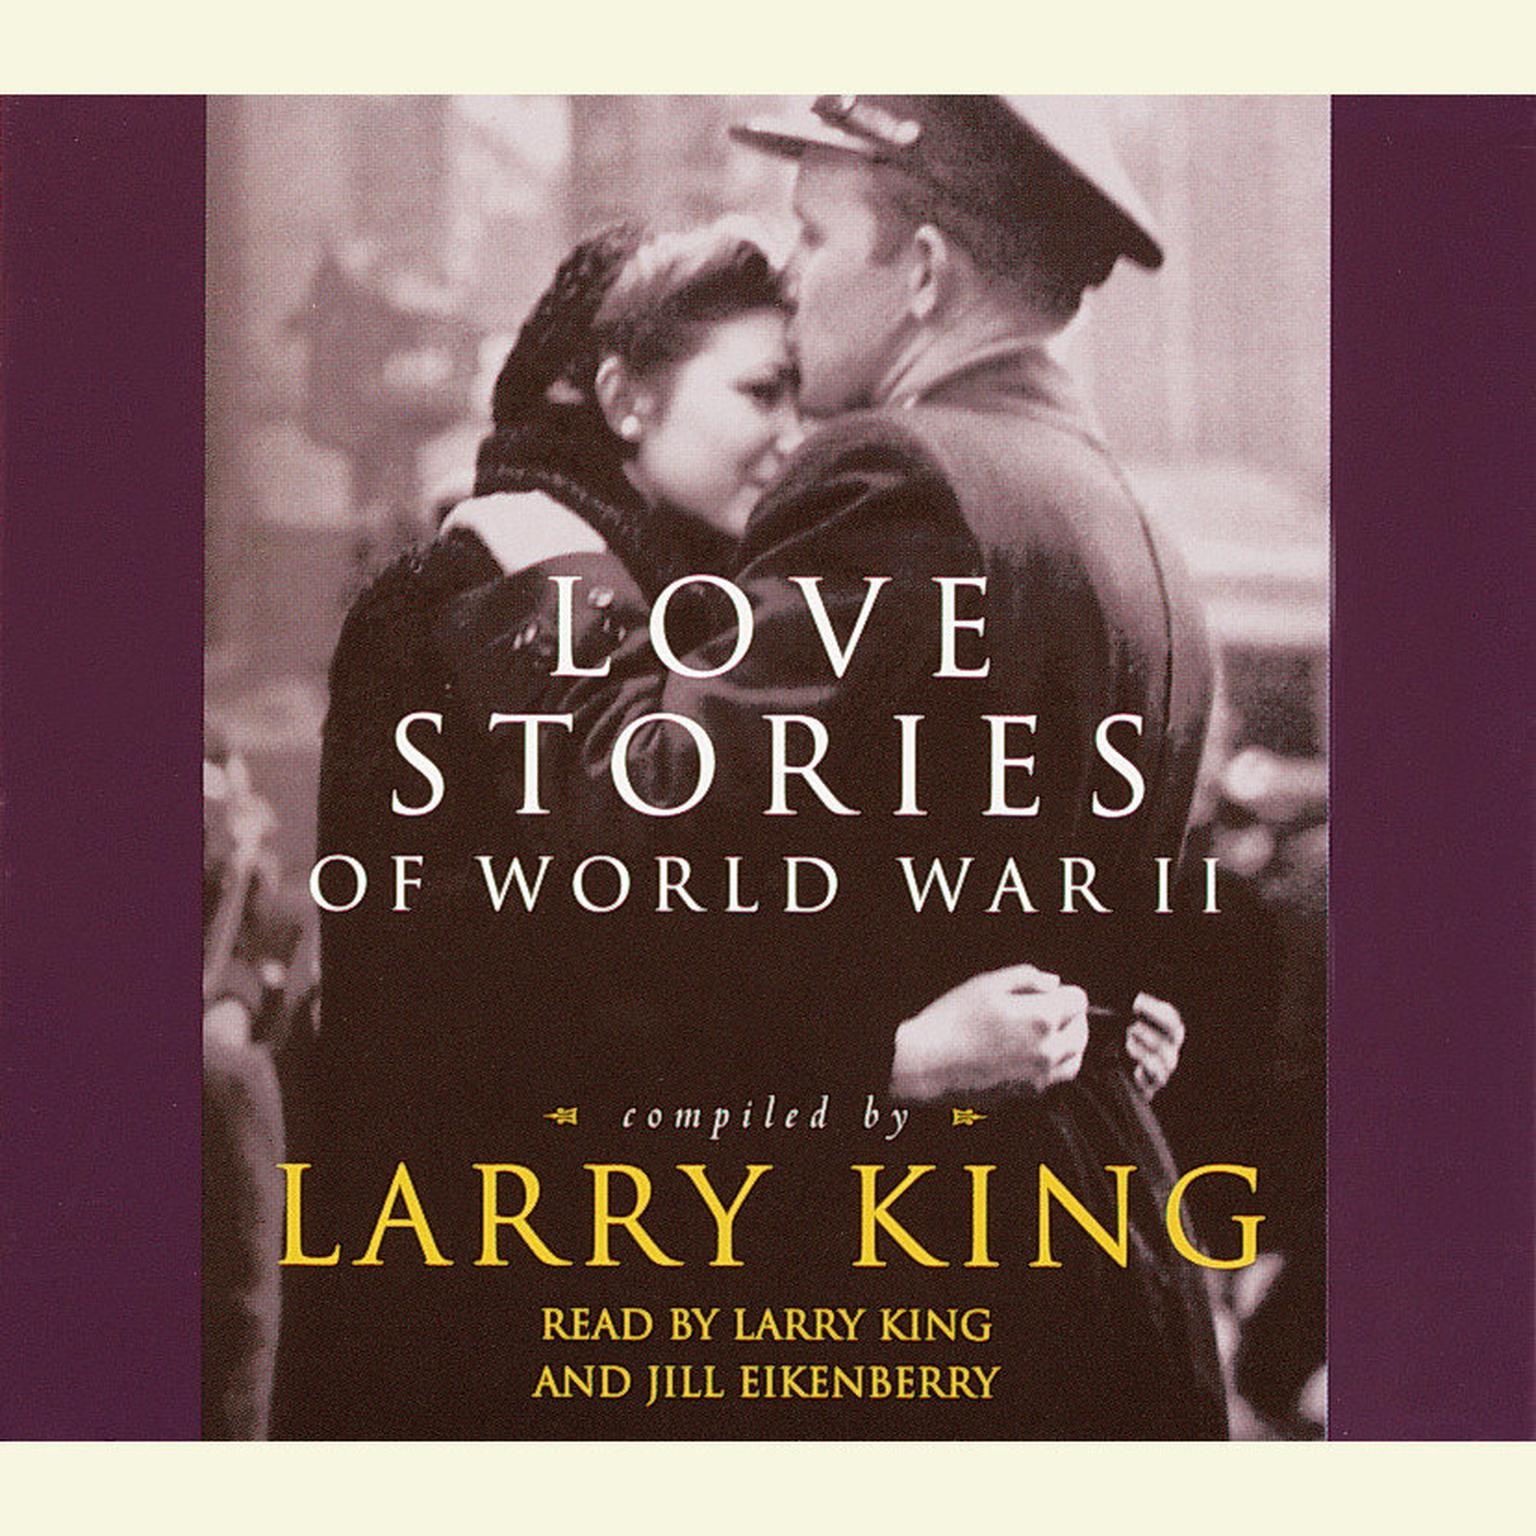 Love Stories (Abridged): Love Stories of World War II Audiobook, by Larry King